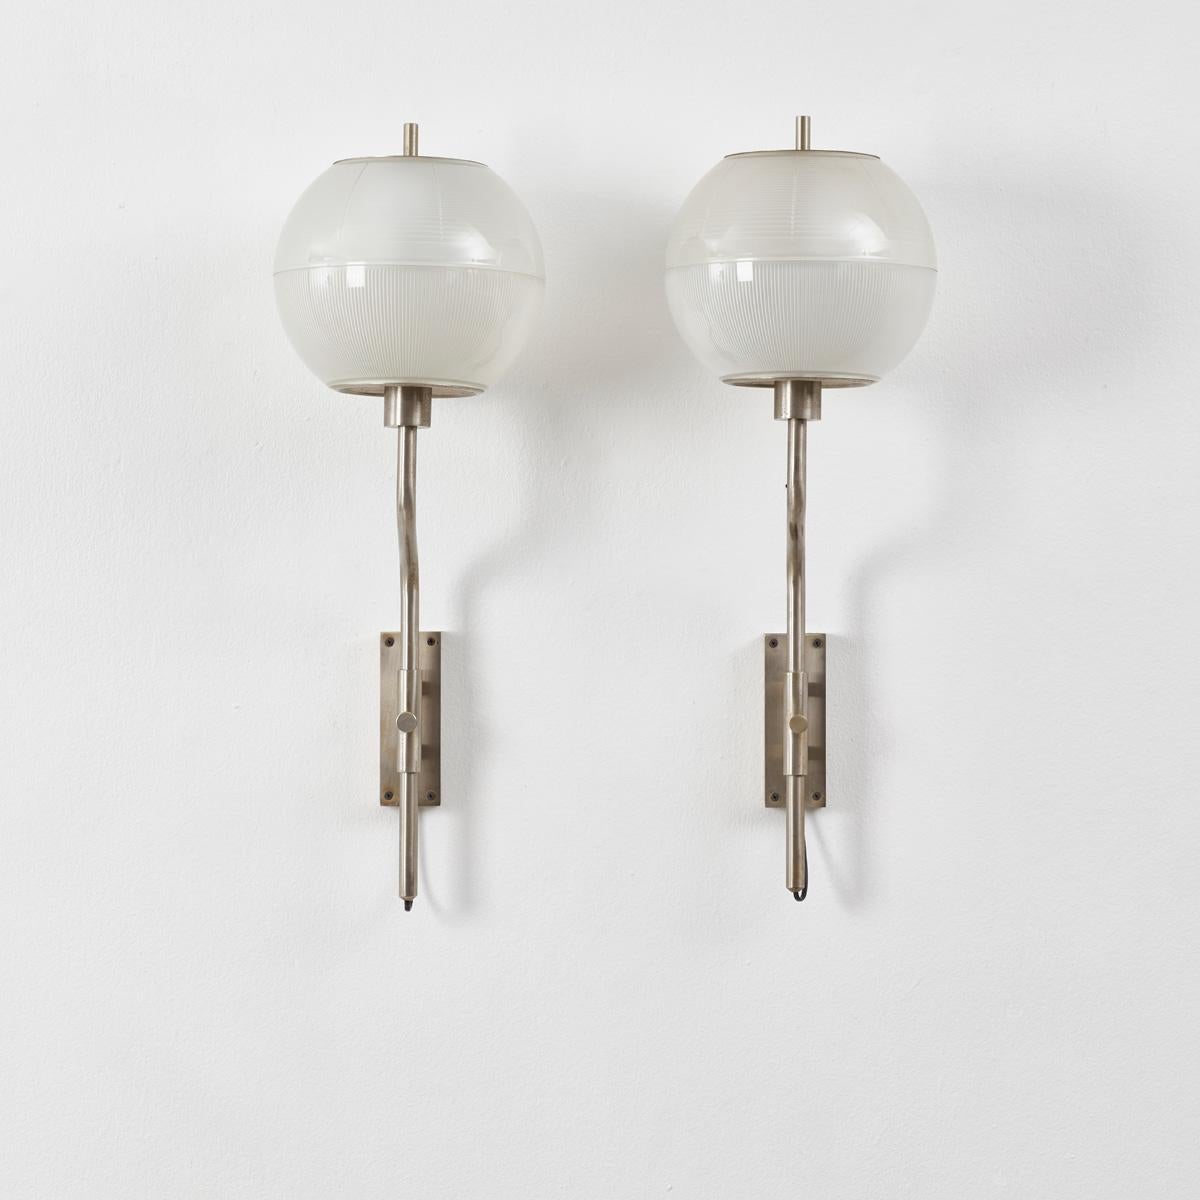 A pair glass globed wall nickel plated wall lamps by Stilnovo, in the manner of Luigi Caccia Dominioni and Sergio Mazza. They attach to the wall by a nickel mount, which holds cleverly placed screw allowing for the height of the lights to be